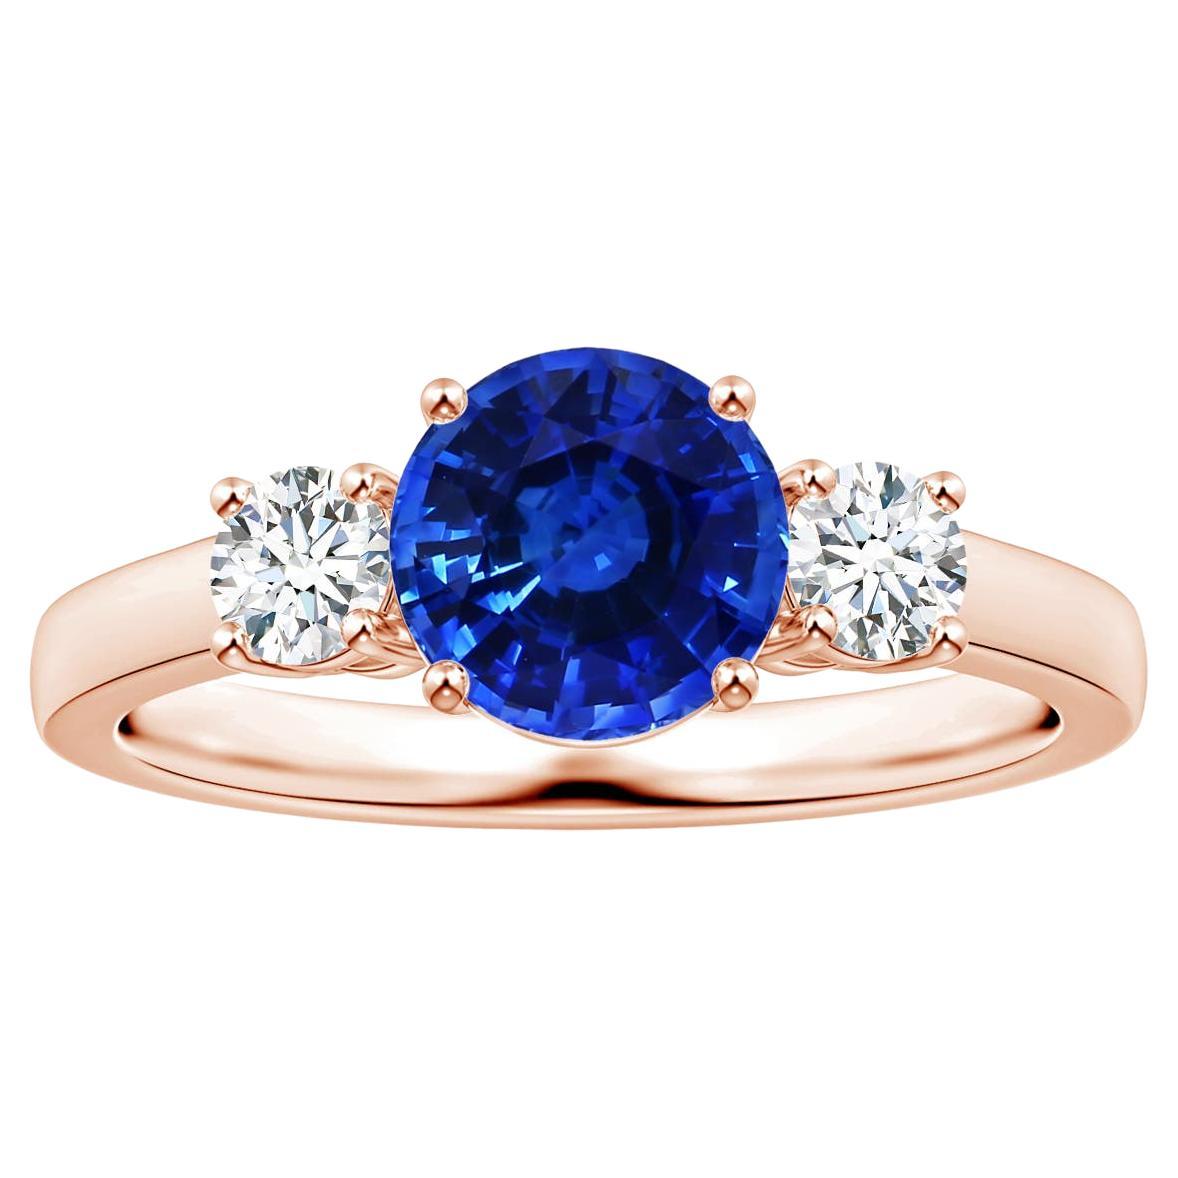 For Sale:  ANGARA Three stone GIA Certified Blue Sapphire Ring in Rose Gold with Diamonds